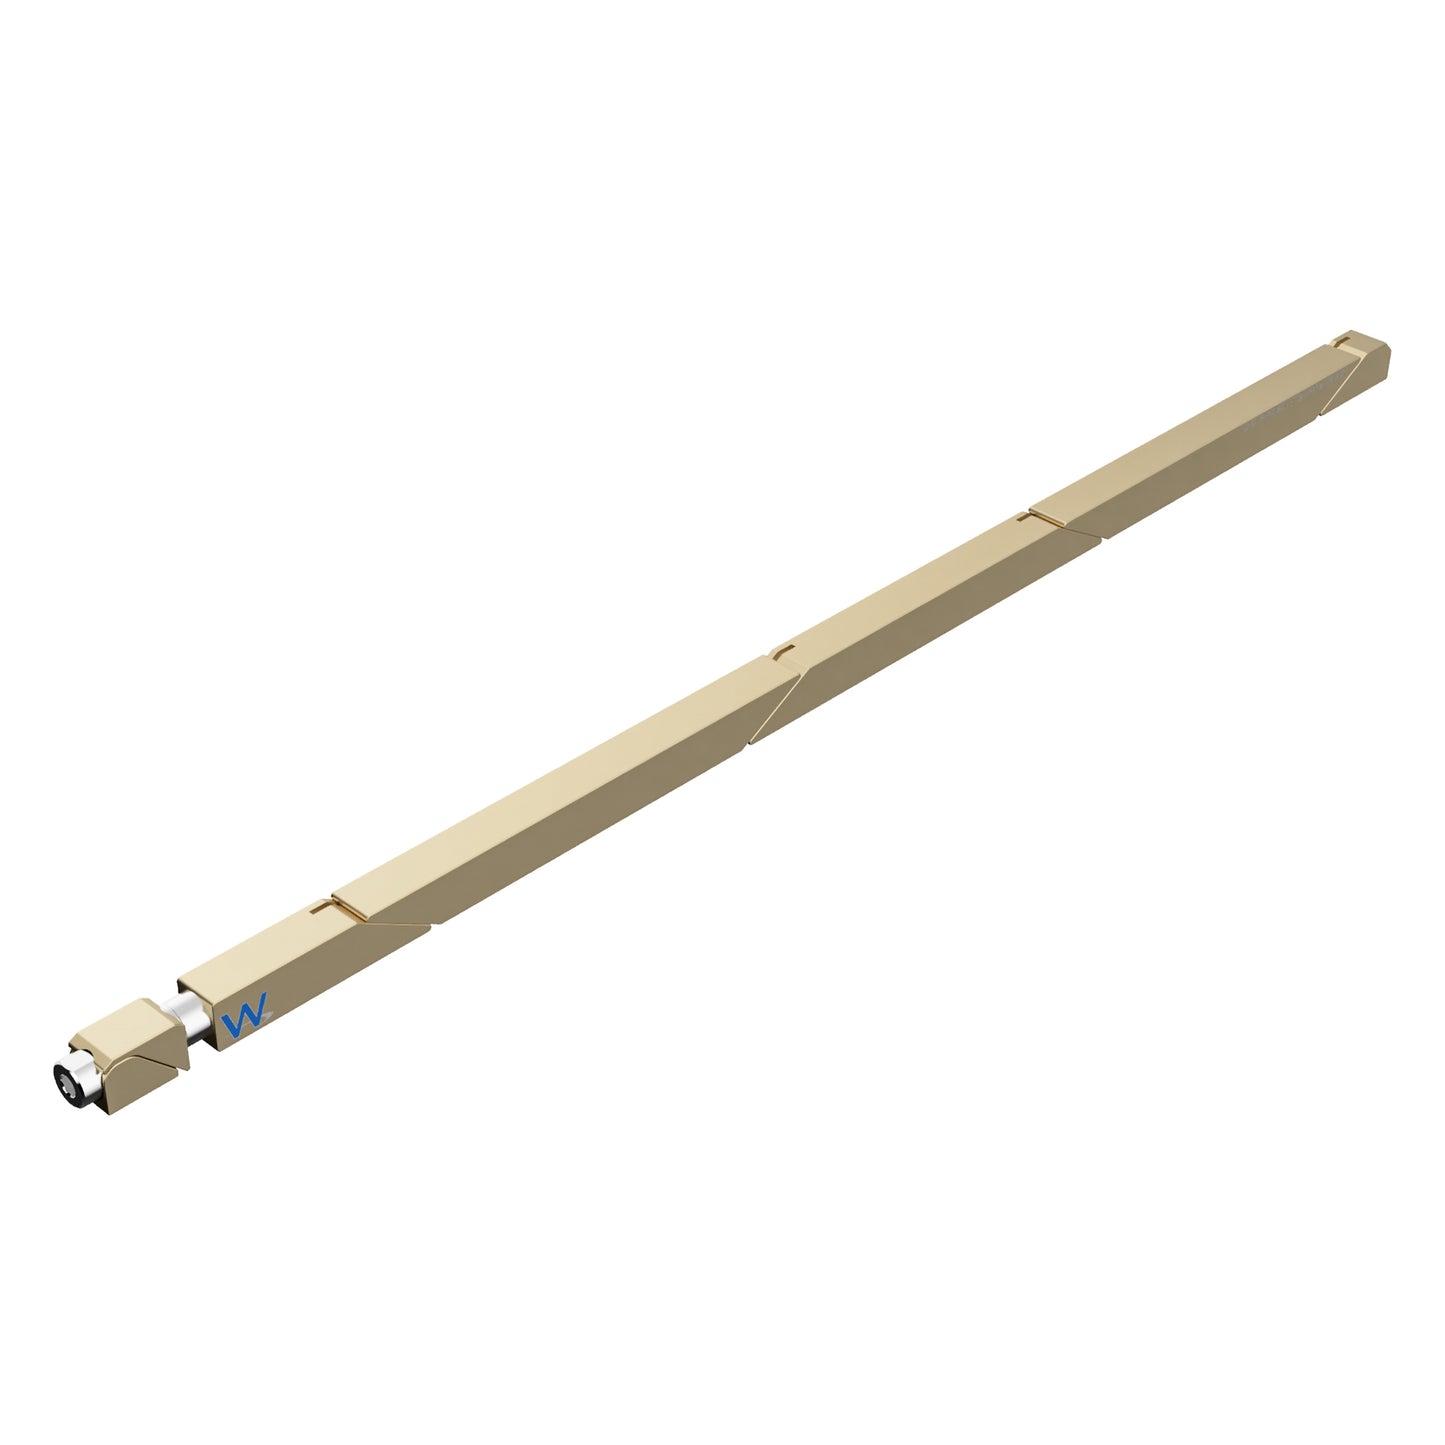 SW7-90-270-250 Max Force Wedgelock, segmented long rectulangular hardware component, Gold Chemical Film Finish